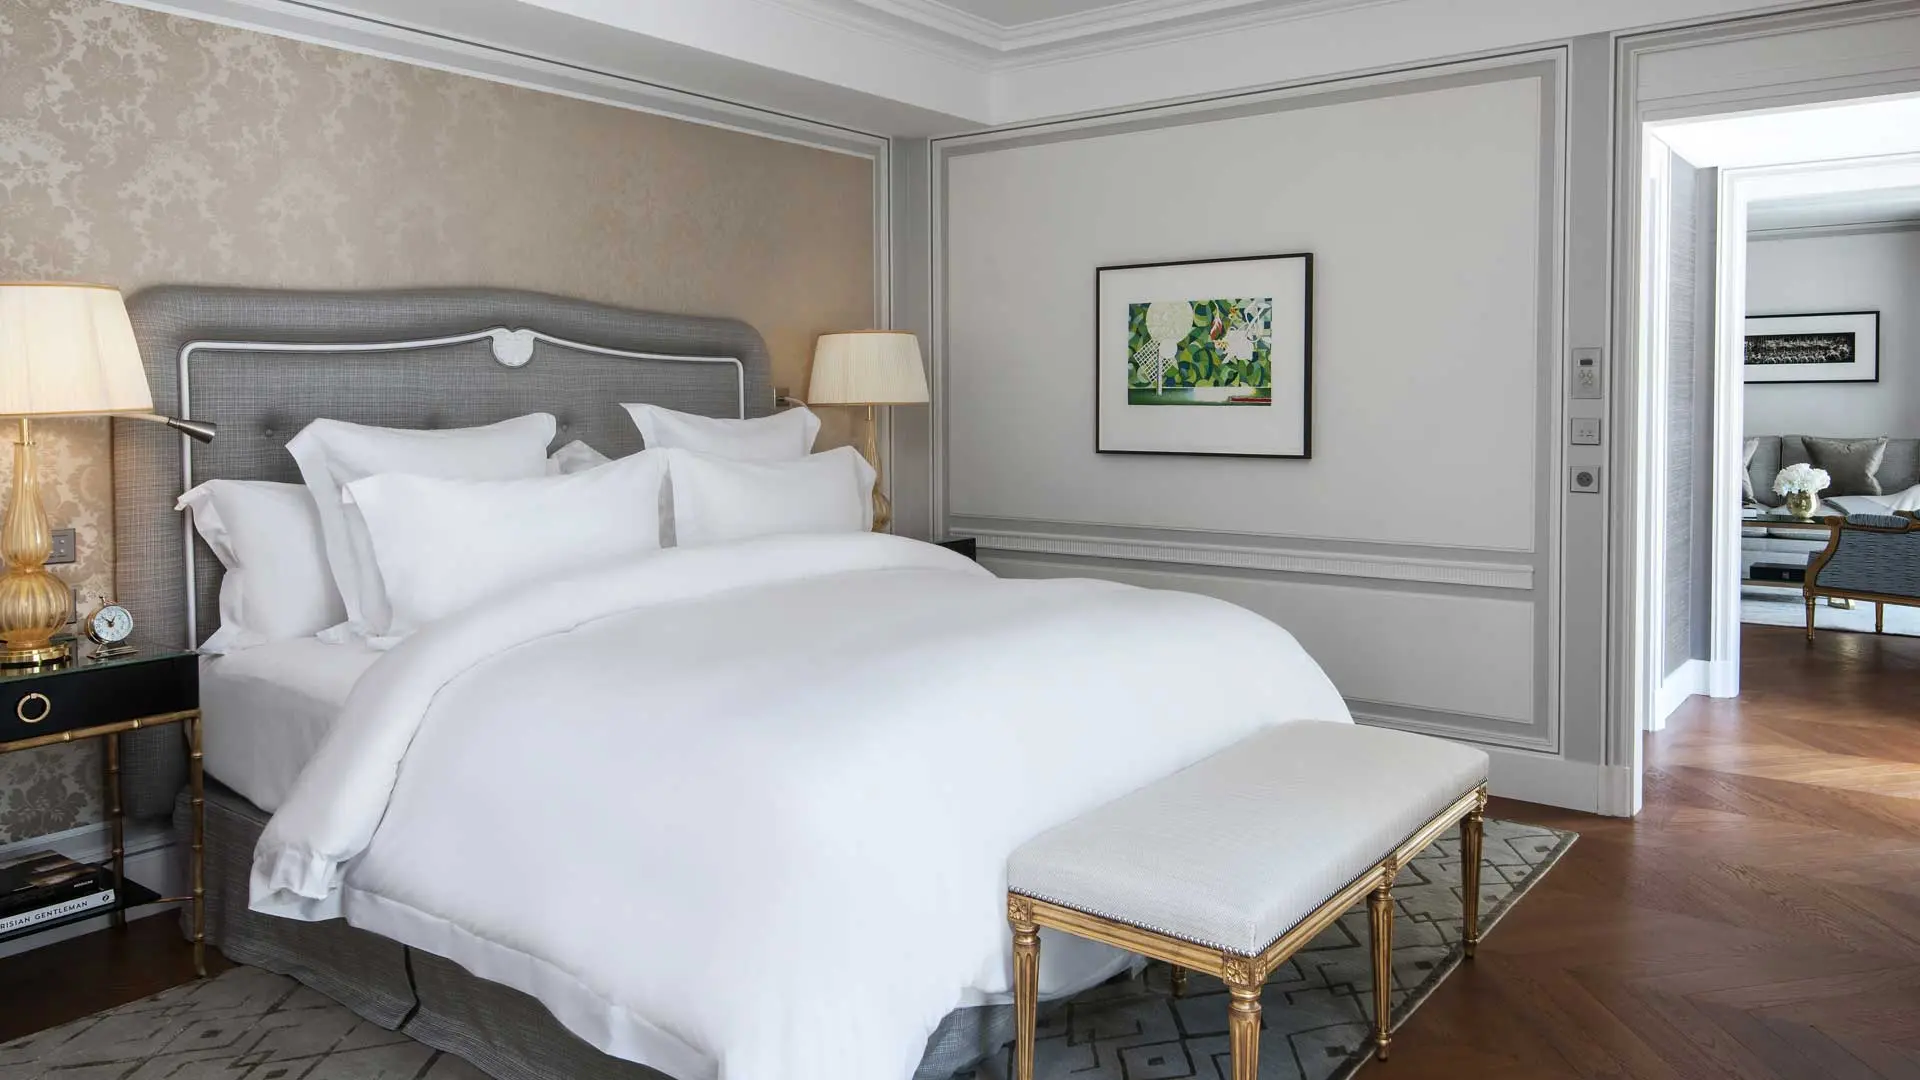 Hotel review Accommodation' - Hôtel de Crillon, A Rosewood Hotel  - 11